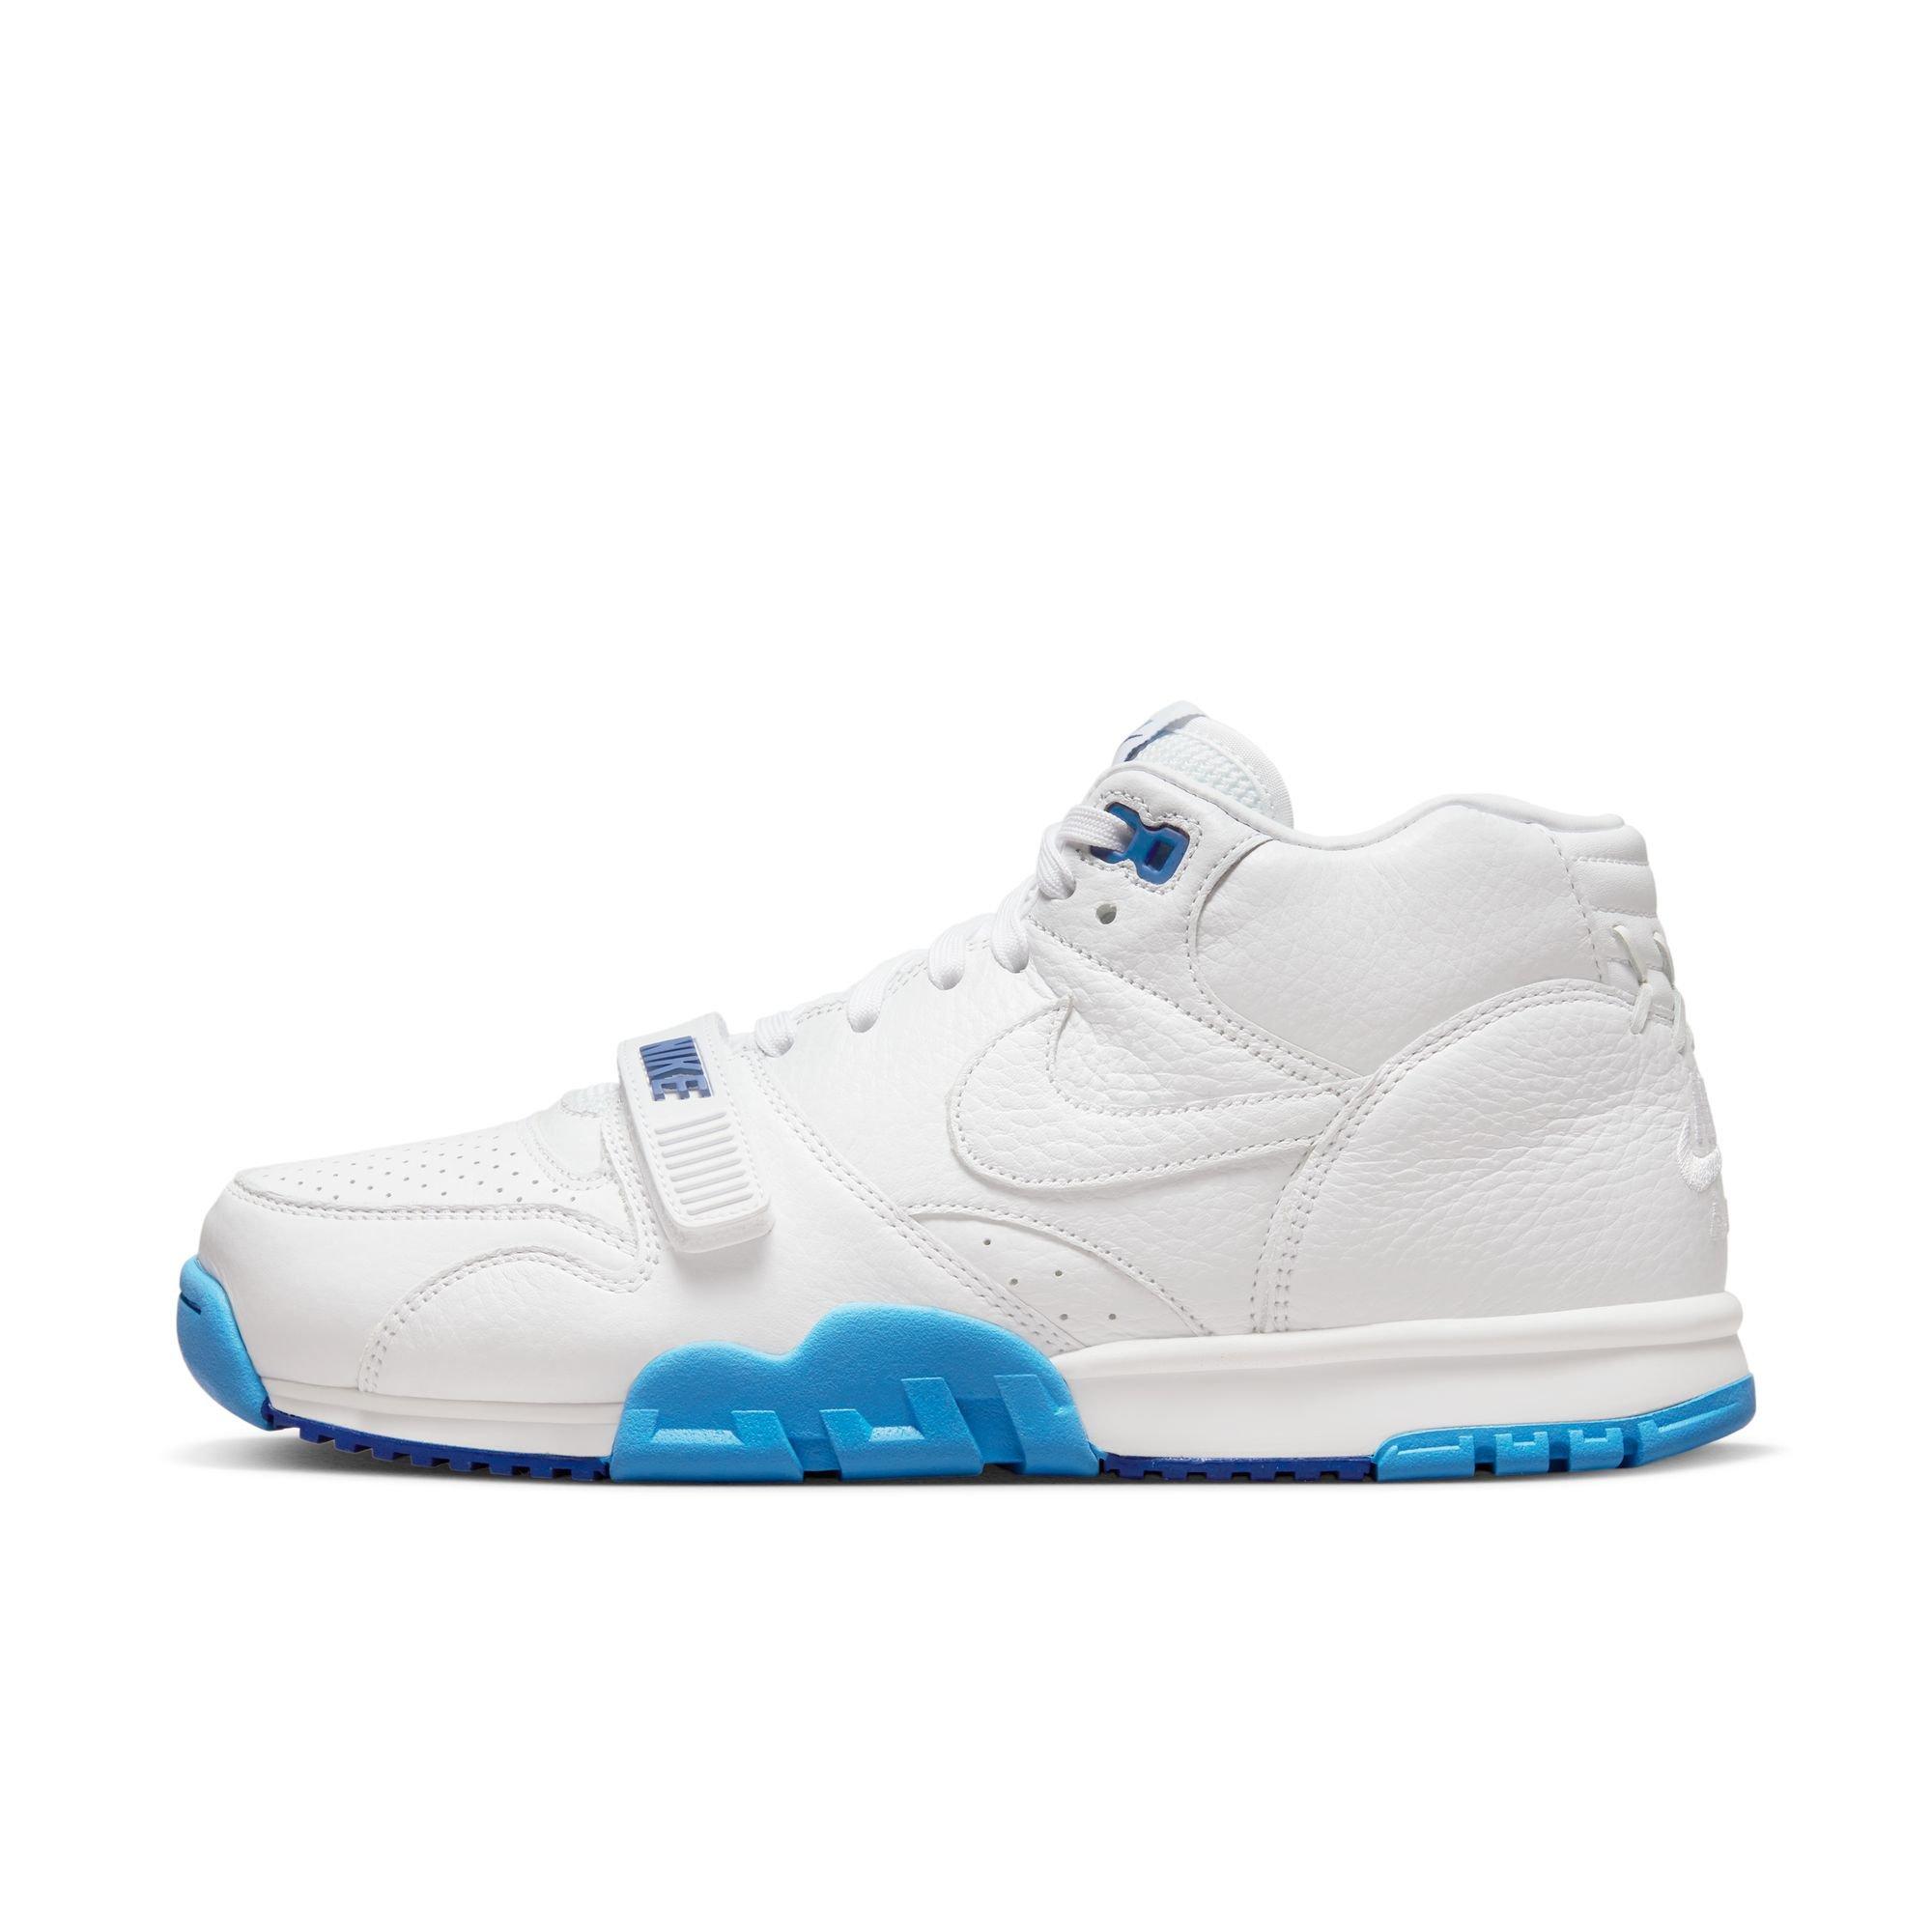 More All-White Finishes: Nike Air Trainer 1 •